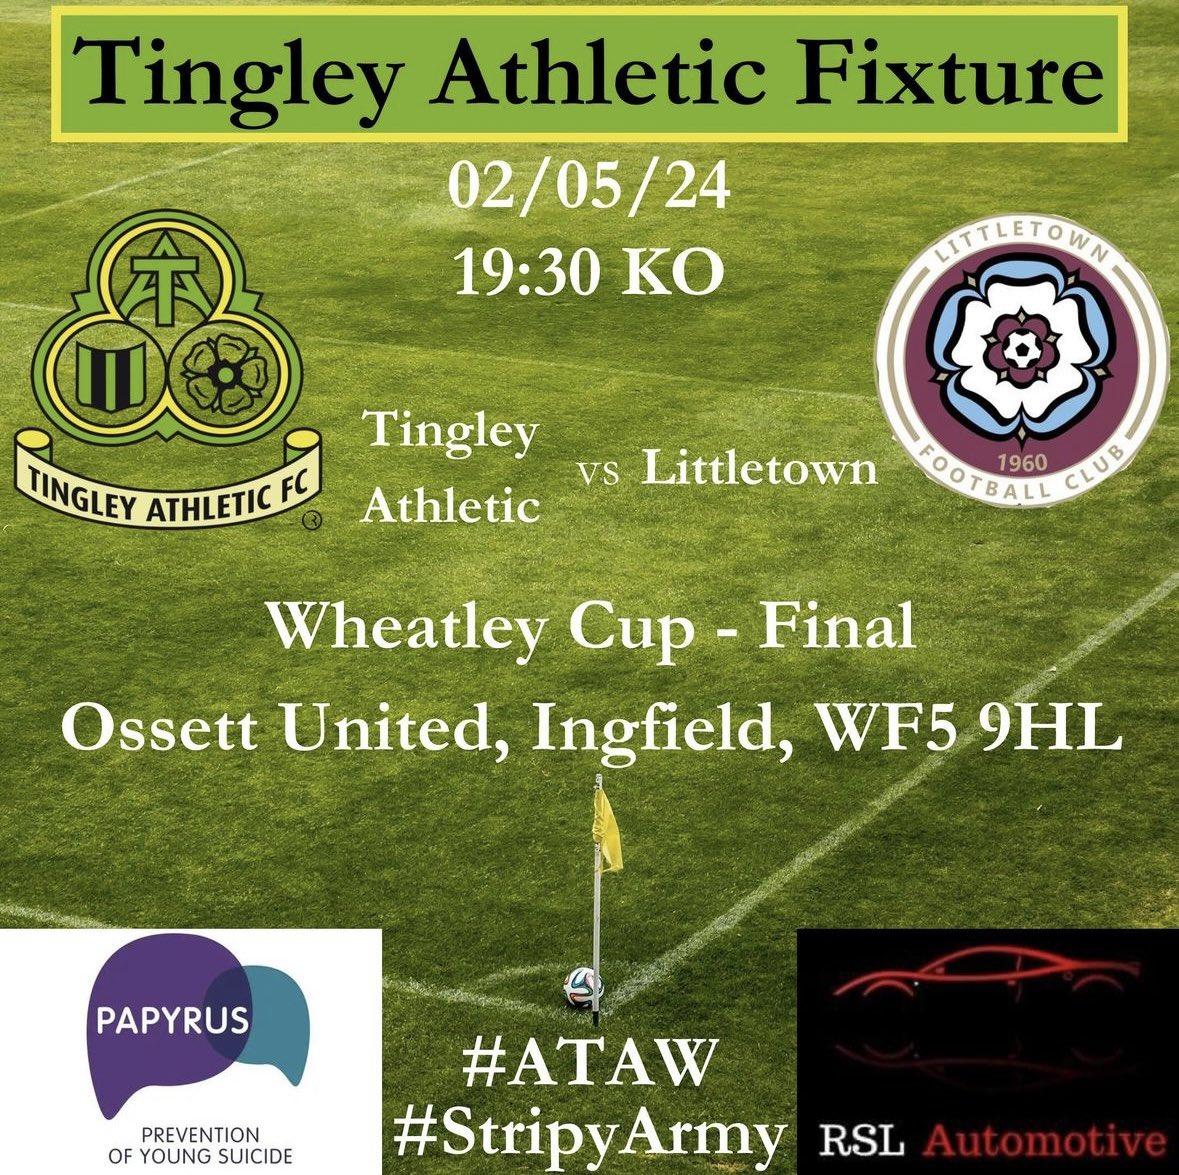 Looking forward to our cup final tonight! 

All support hugely appreciated ☀️🍺⚽️

#ATAW #greenarmy